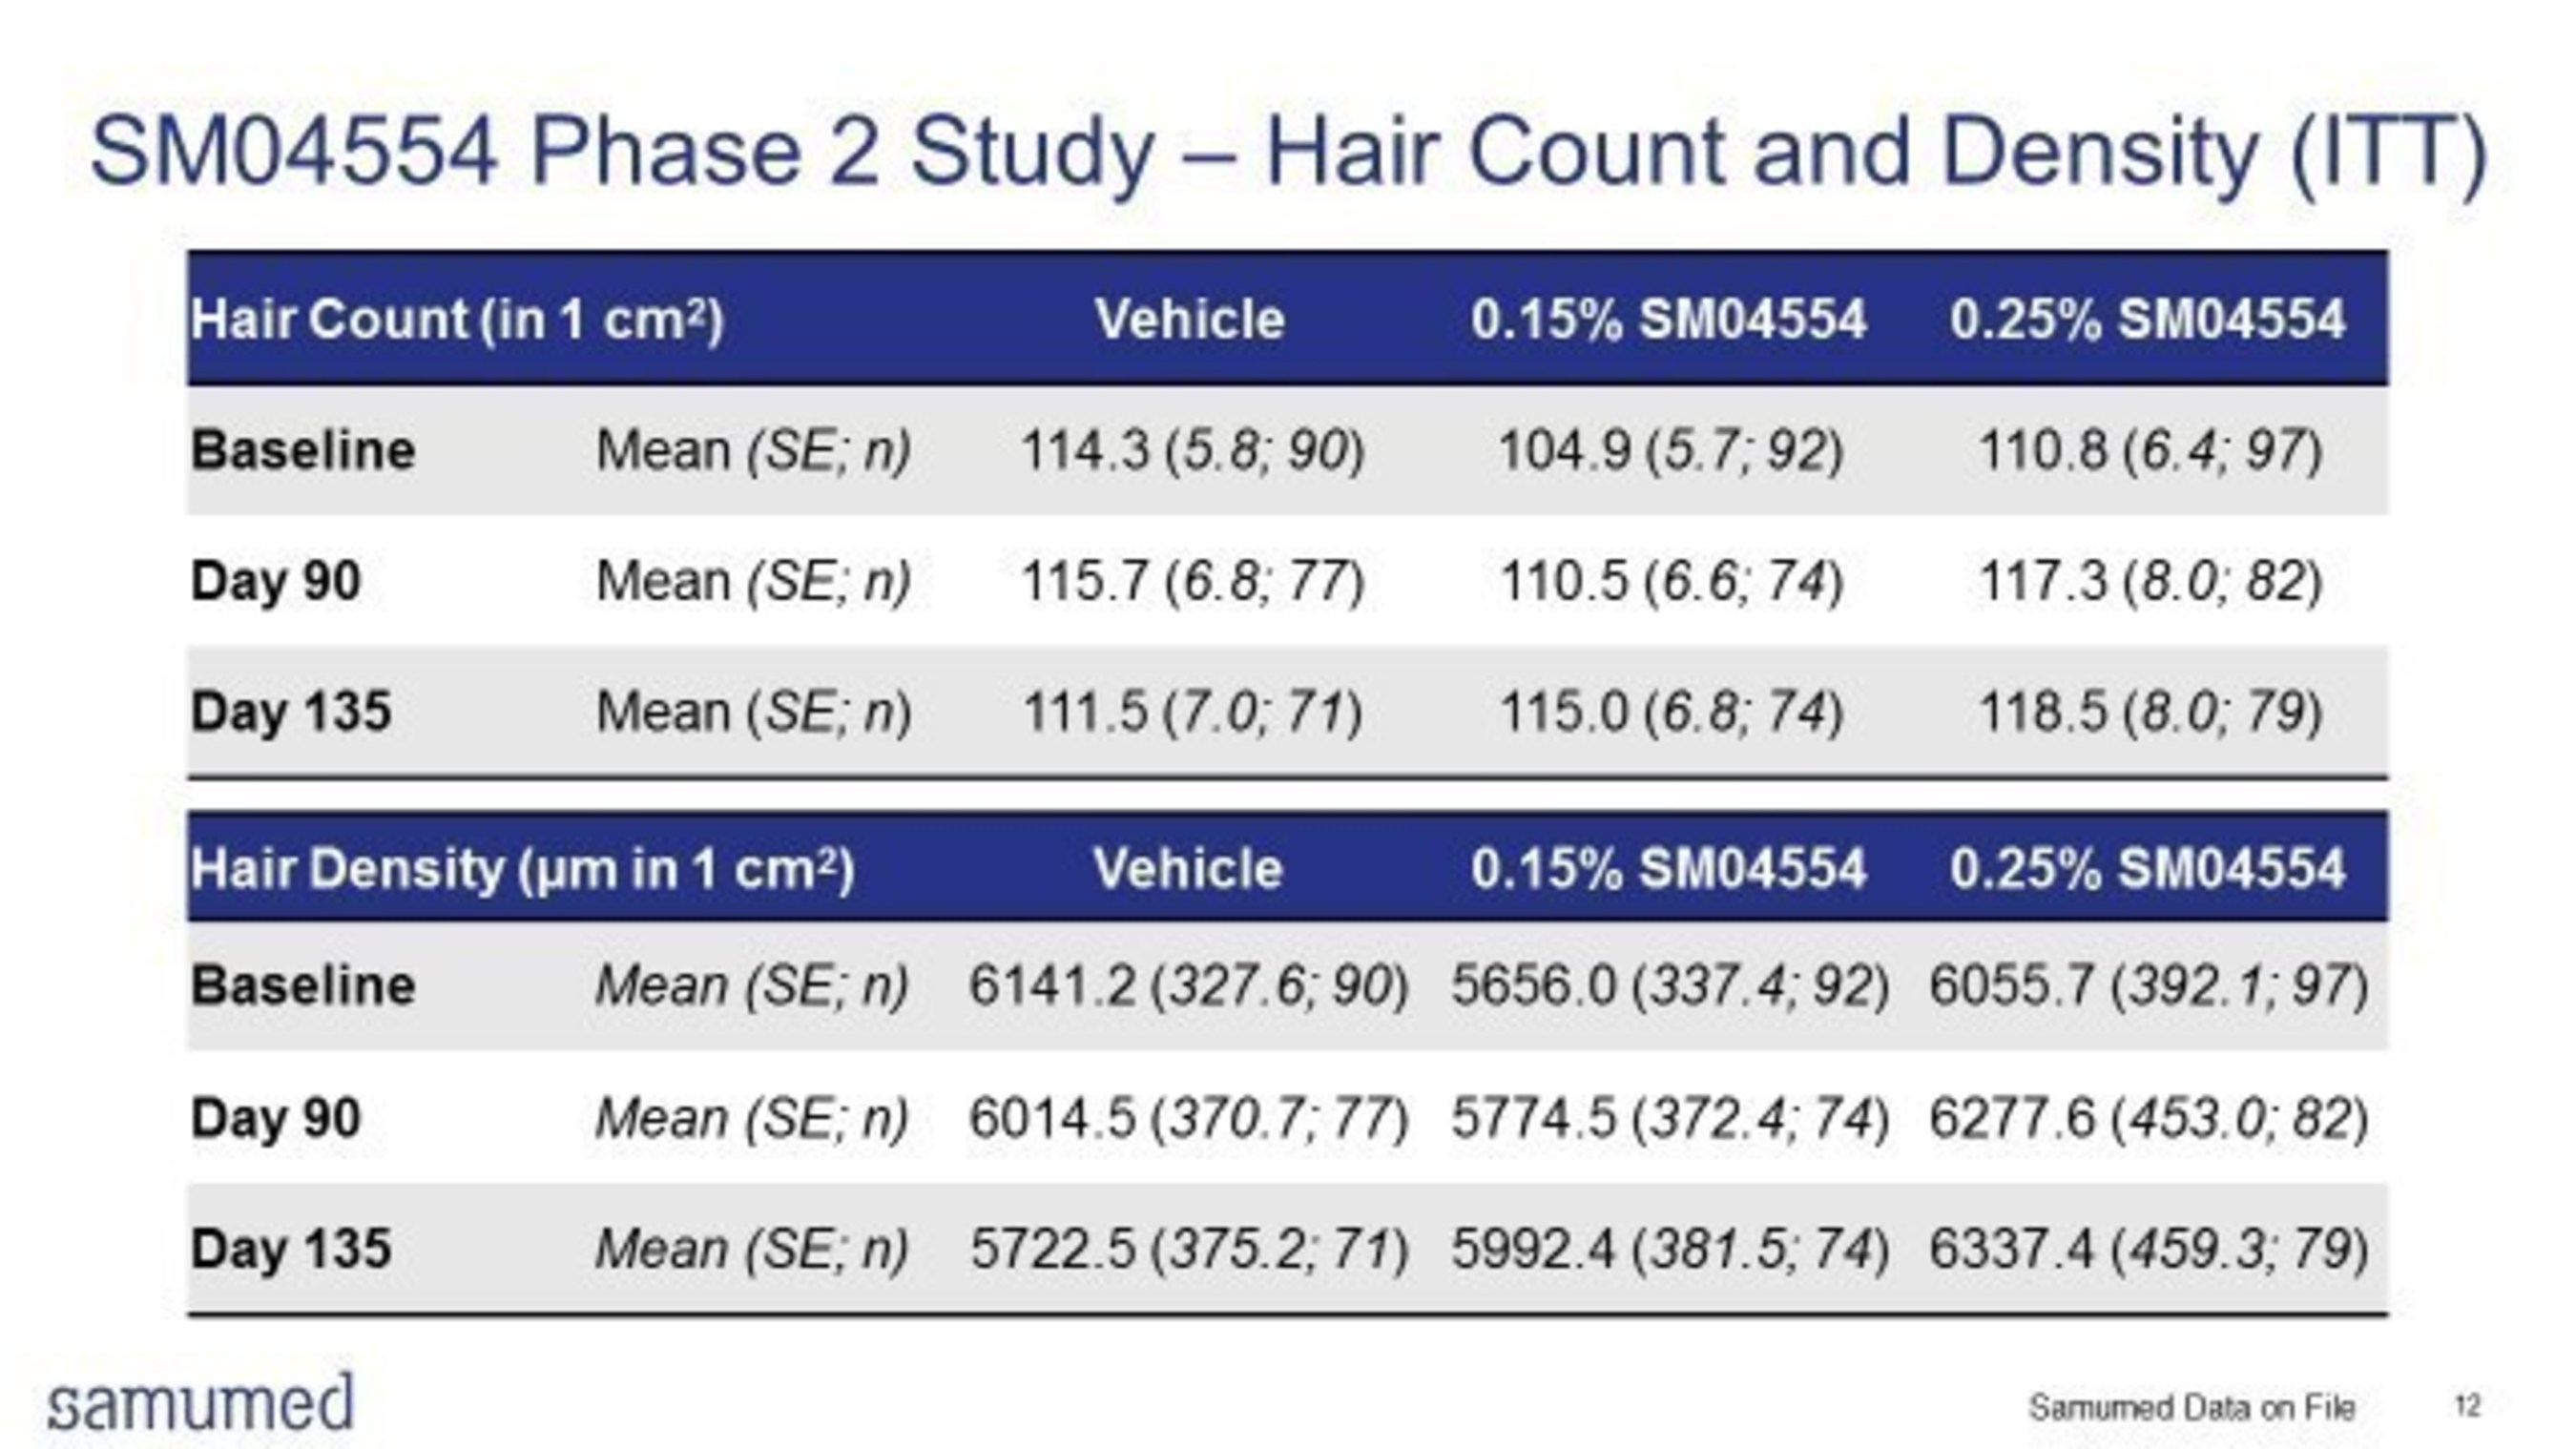 SM04554 Phase 2 Study - Hair Count and Density (ITT)